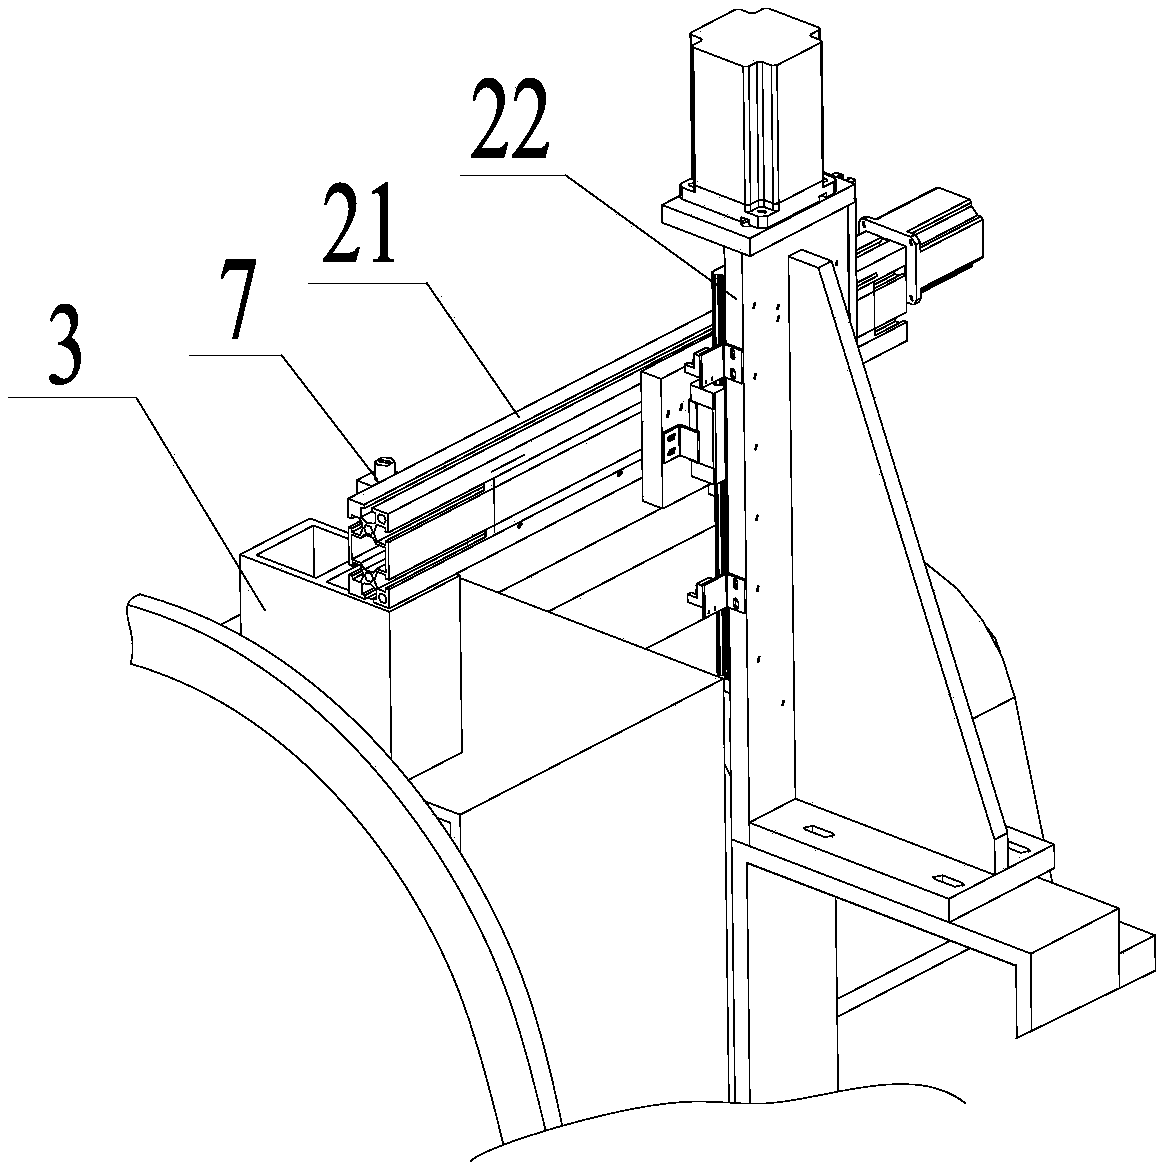 Device and method for feeding and pasting drying agents and humidity indicators to spools